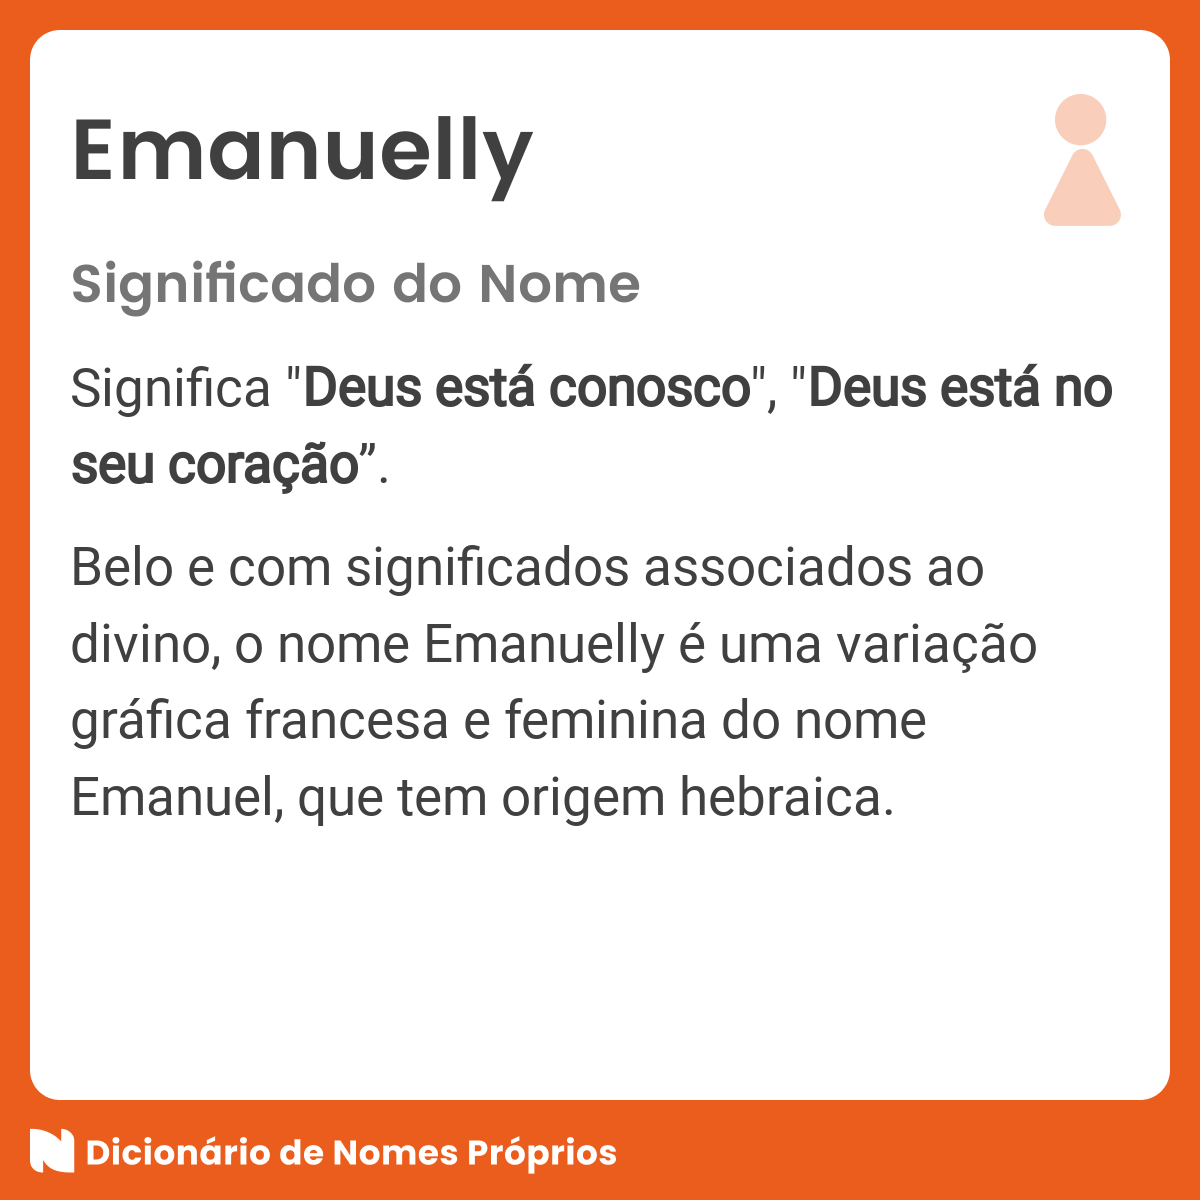 Emanuelly